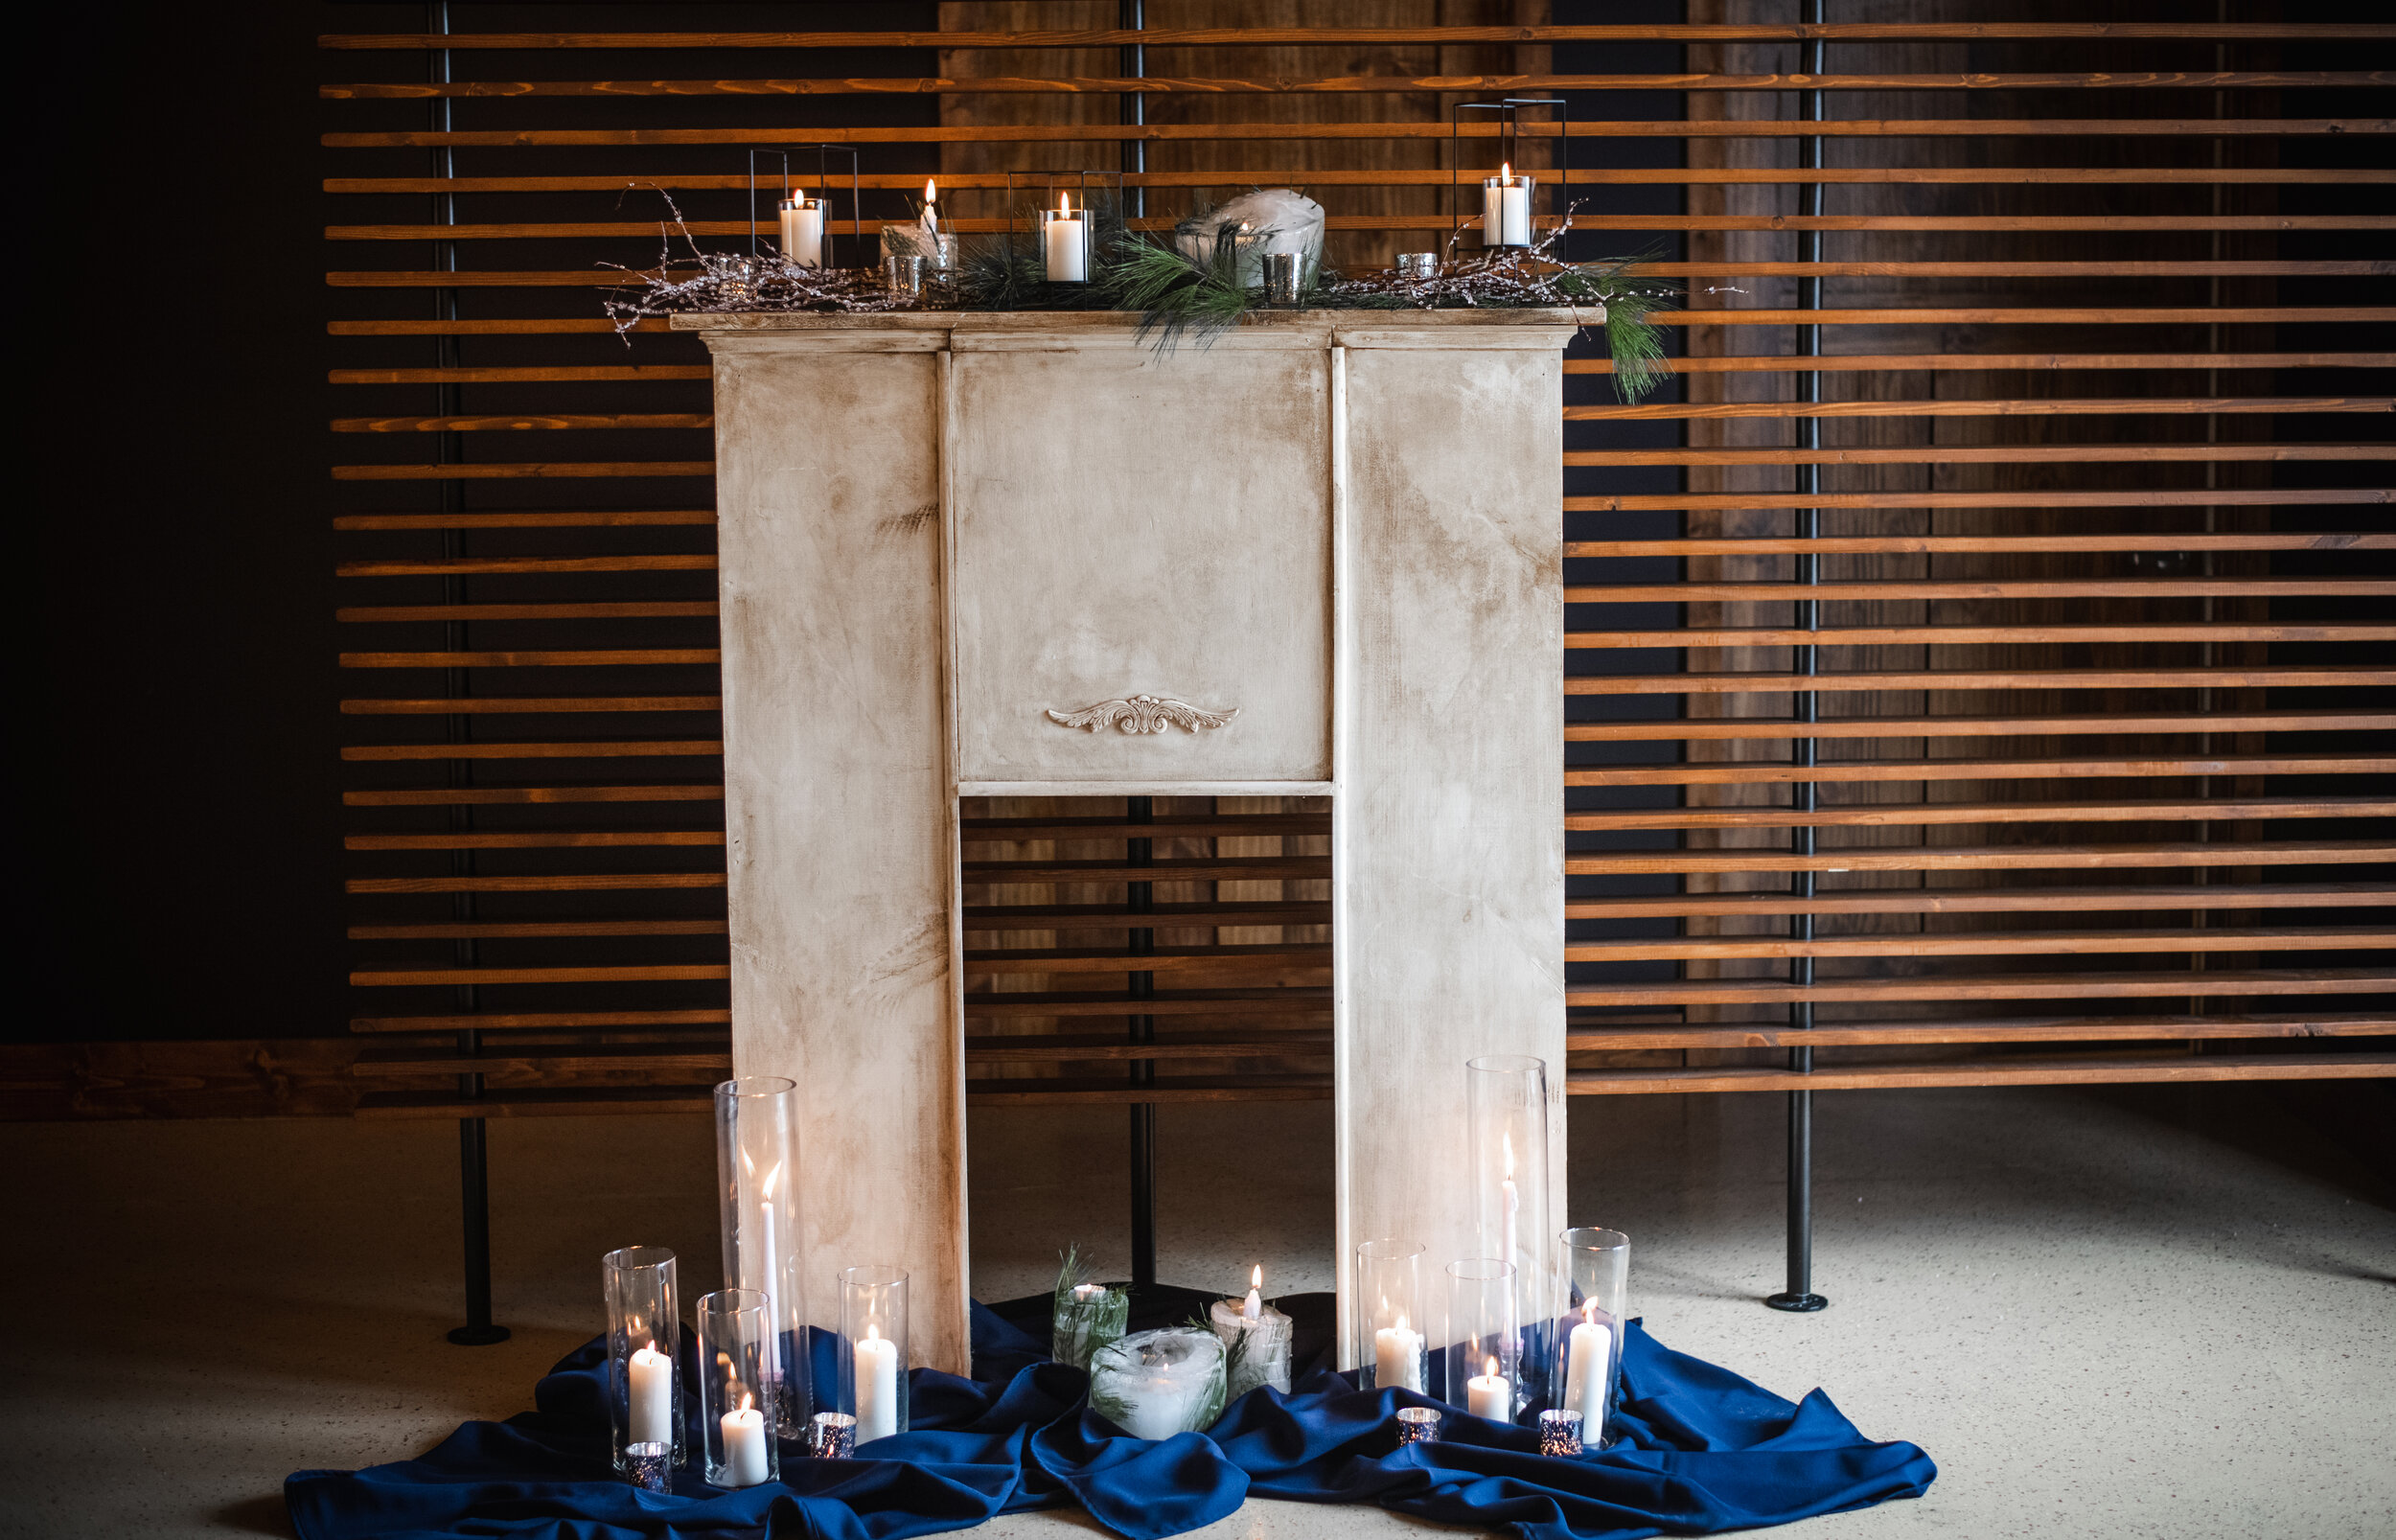 Classic Blue Winter Wedding Styled Shoot by Weddings by Danica featured on CHI thee WED